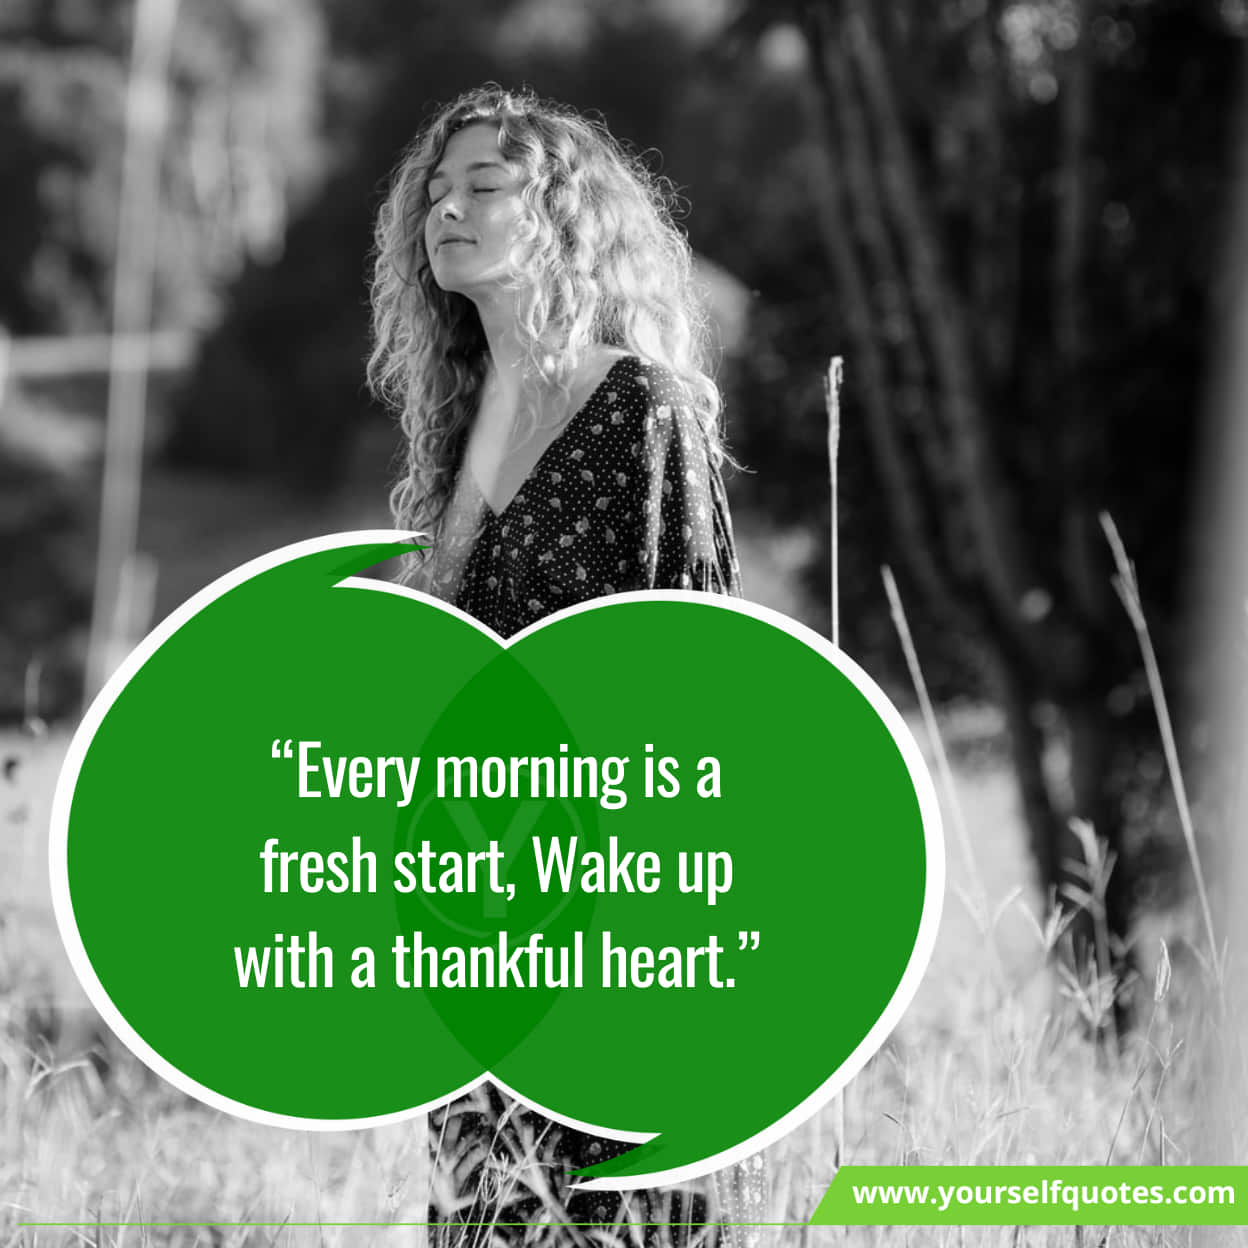 150 Good Morning Quotes Images To Make Your Day Happiest